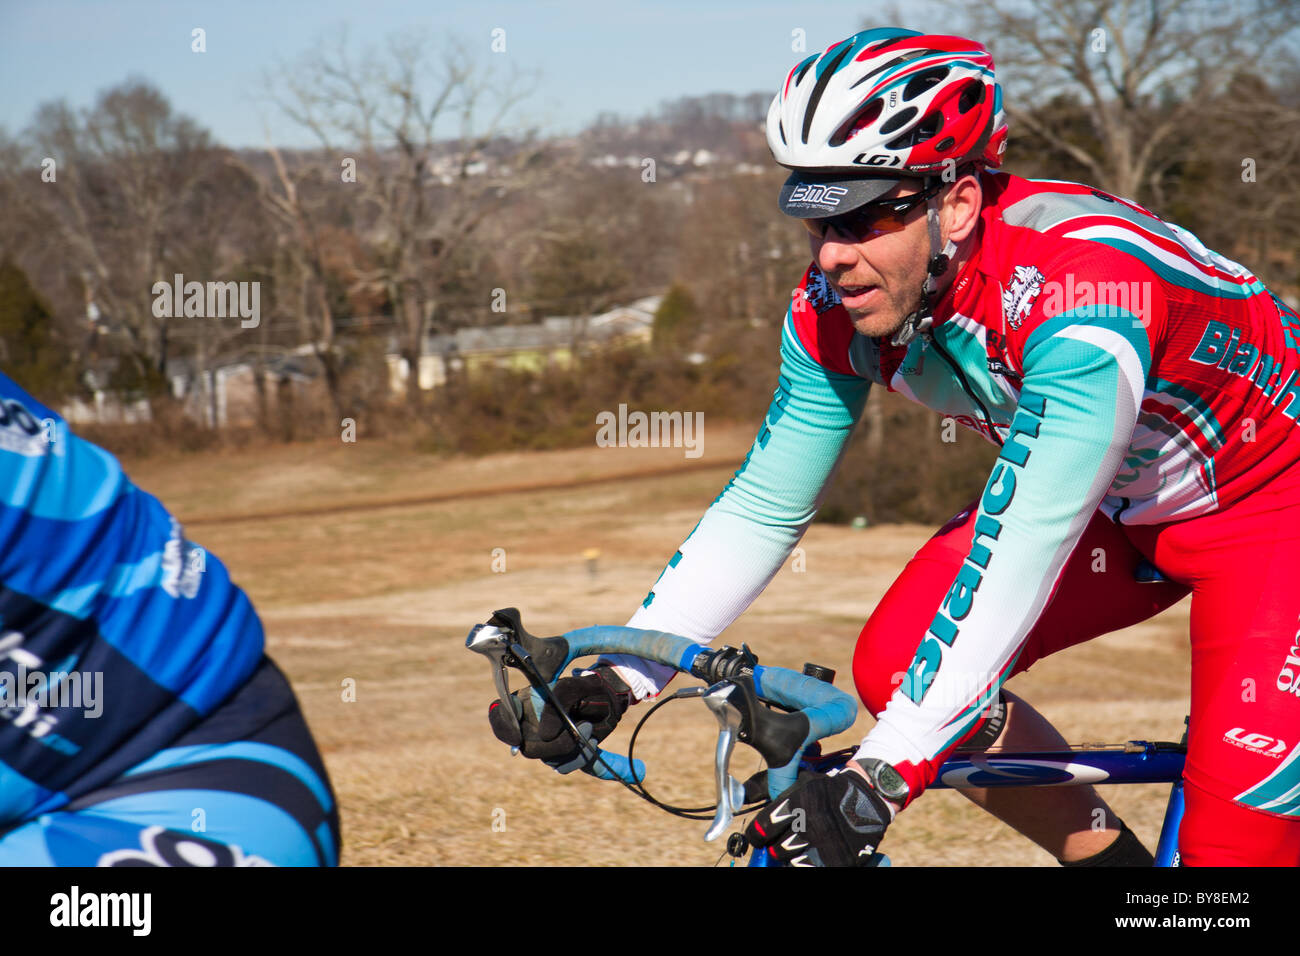 Cyclers from various teams compete during the Knoxiecross cyclocross series Stock Photo